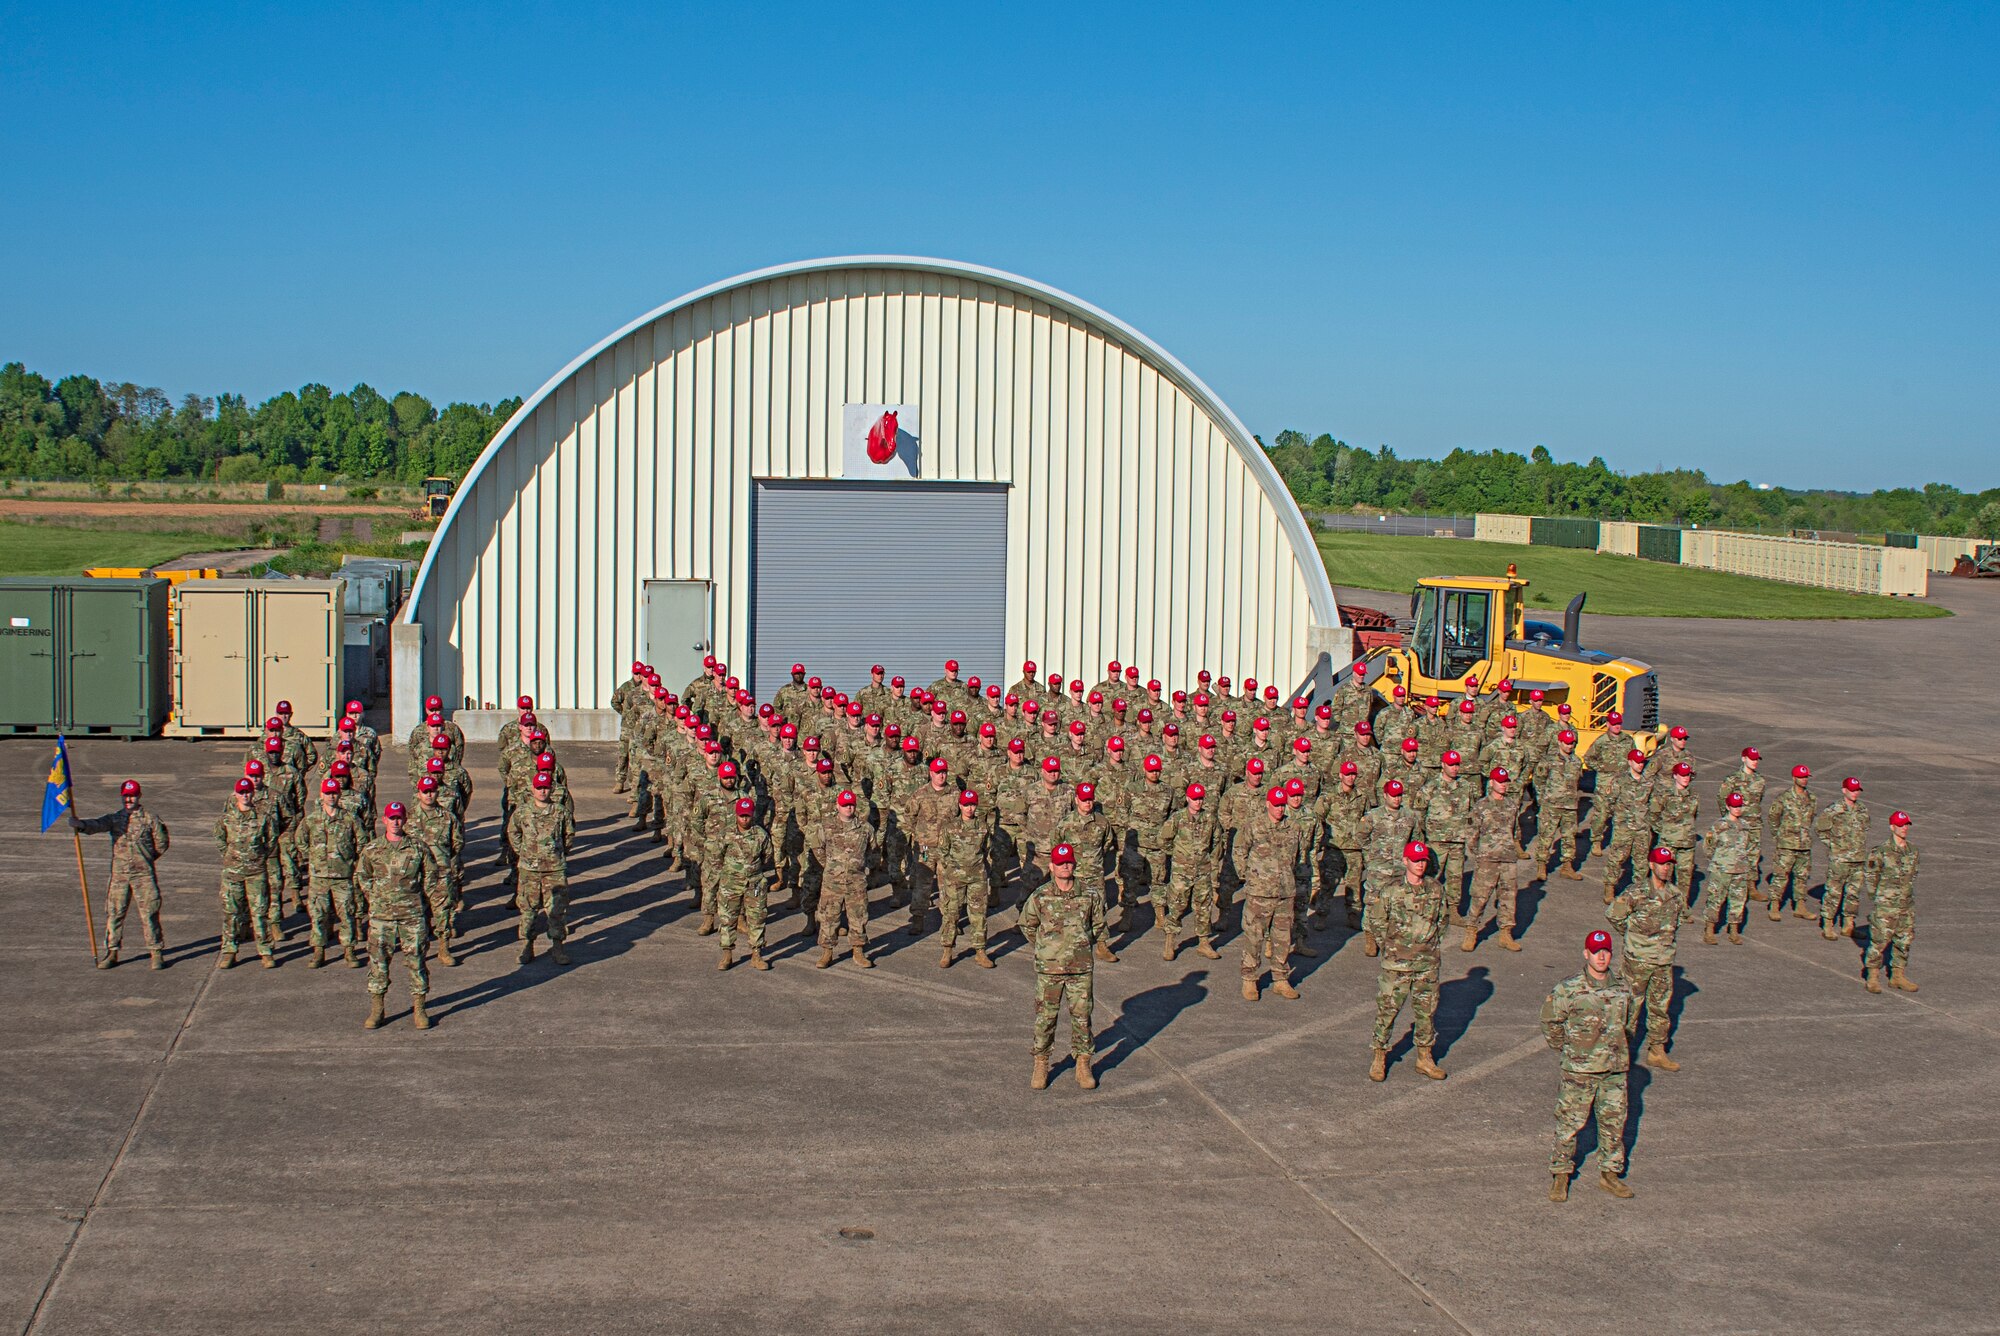 Members of the 201st Rapid Engineer Deployable Heavy Operational Repair Squadron Engineers, or REDHORSE, Detachment 1, pose for a picture at Biddle Air National Guard Base in Horsham, Pennsylvania, May 15, 2021. This is the first official group photo of the 201st REDHORSE Det. 1 in the Operational Camouflage Pattern, or OCP, utility uniform on base since they returned from their recent deployment overseas.